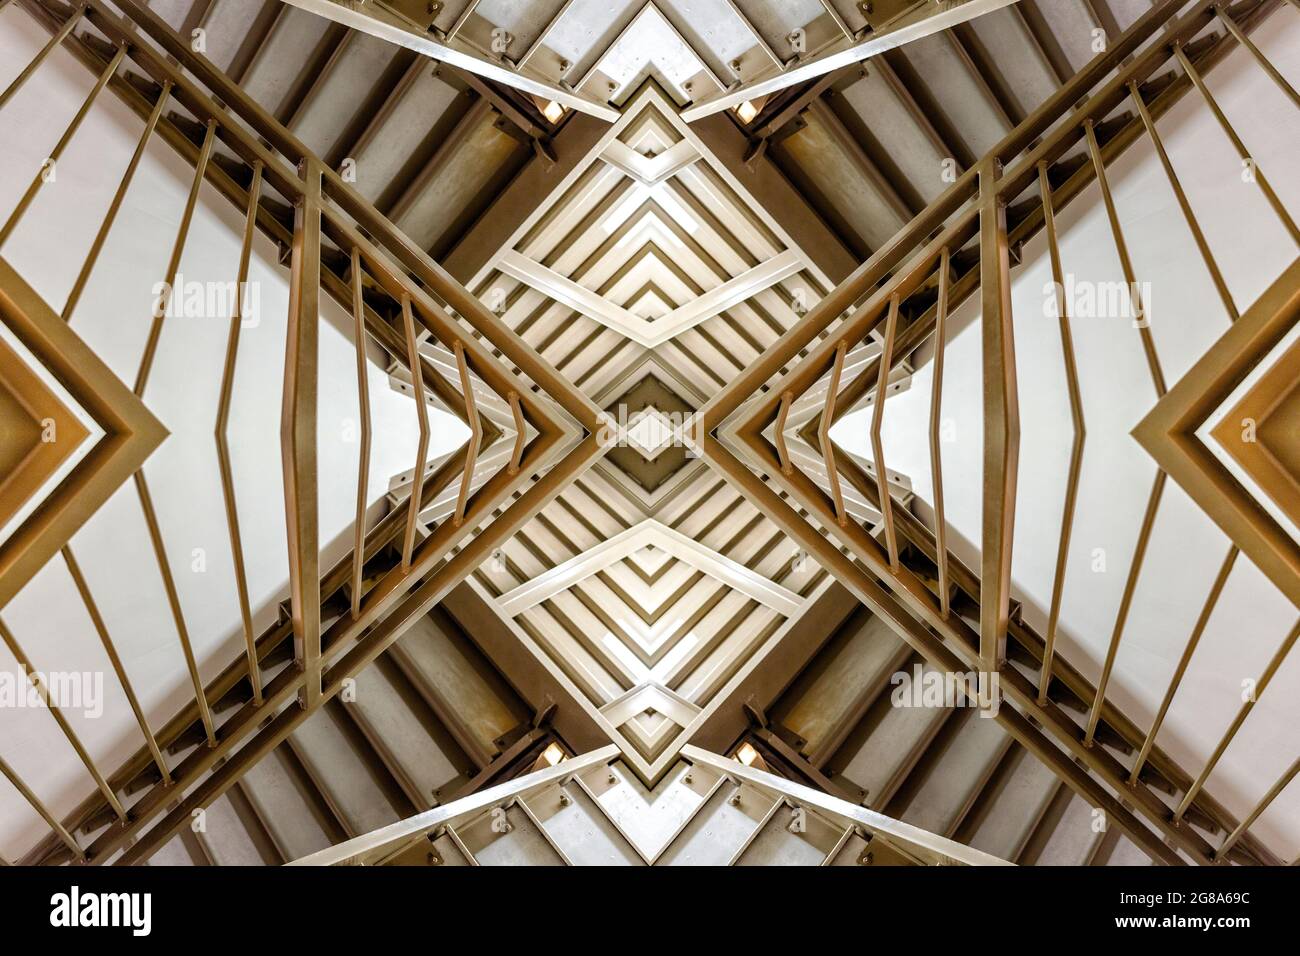 An image of a stair case, steps and railing is turned into an abstract geometric design through duplication, replication, and composite photography. Stock Photo